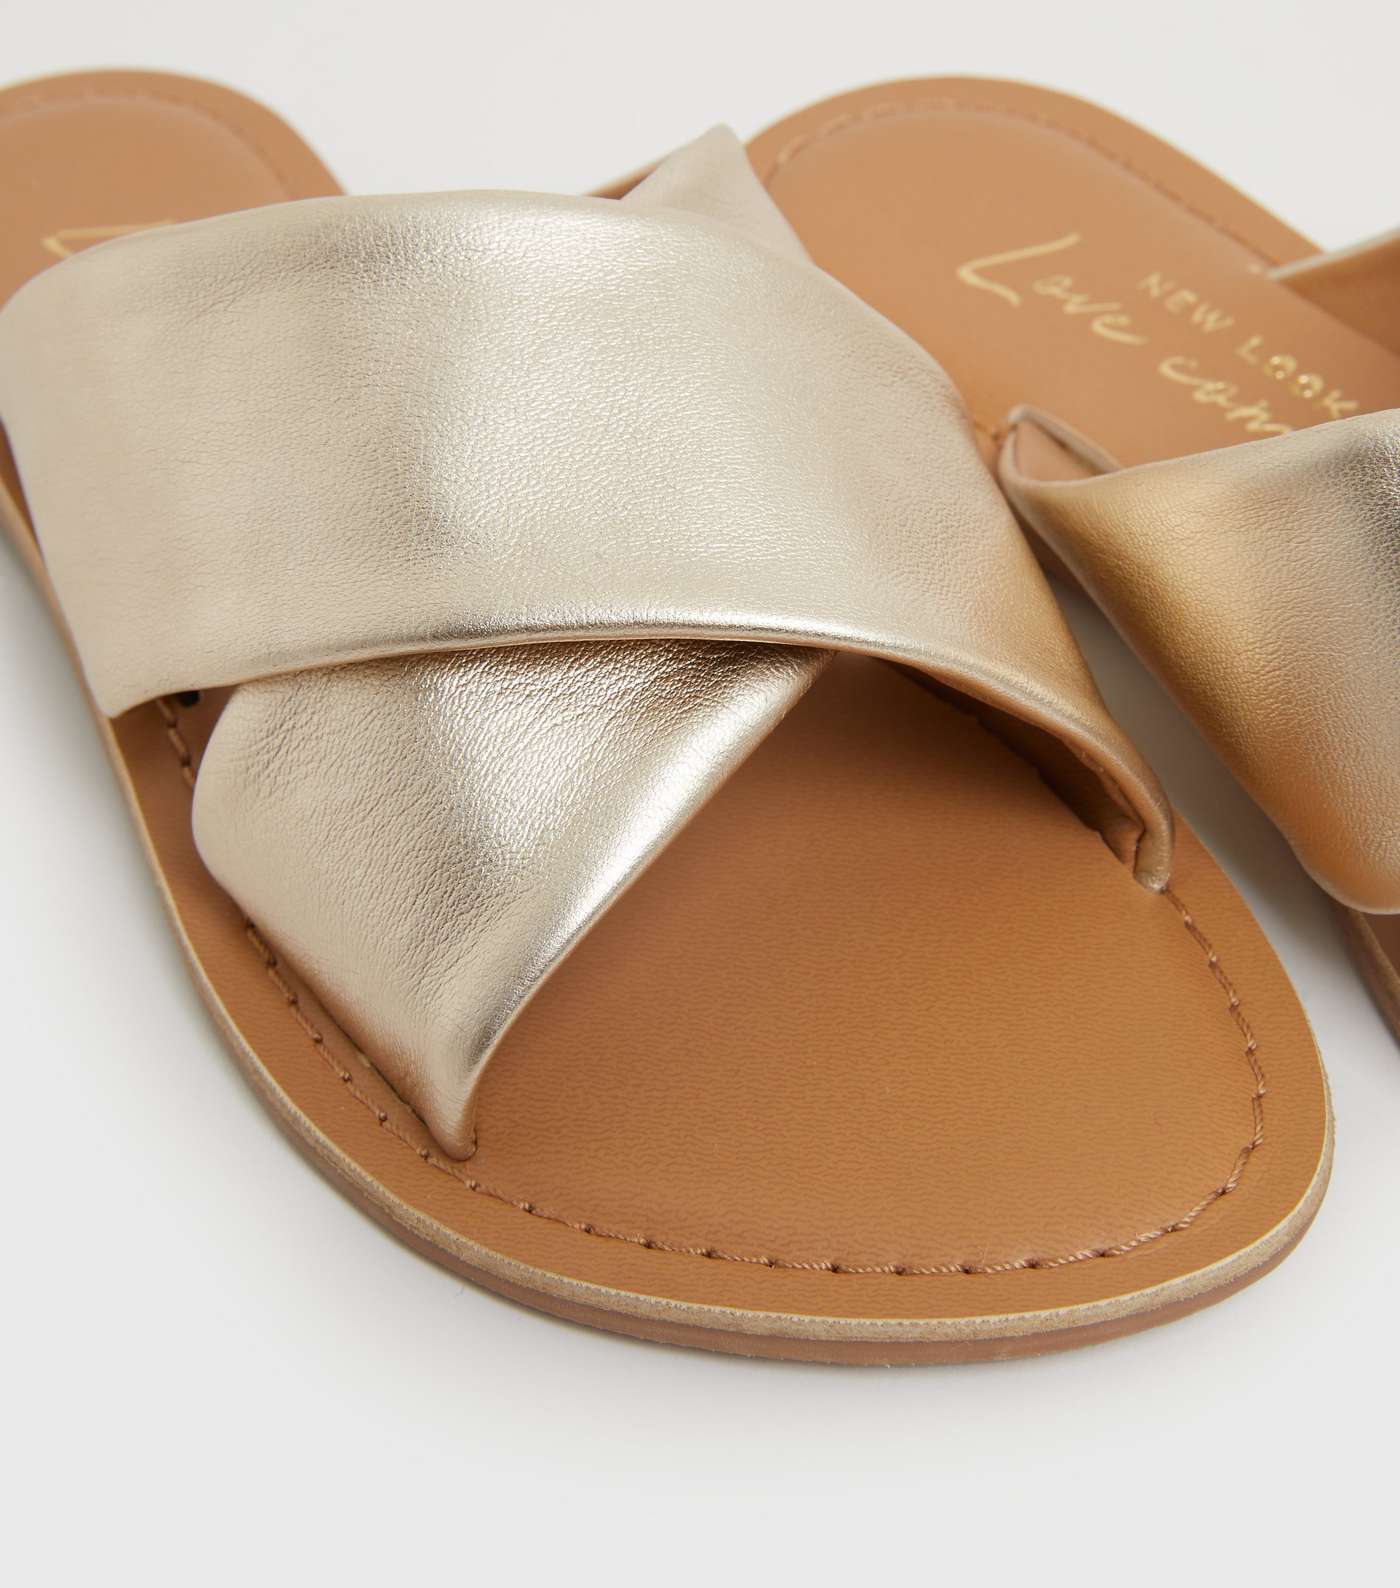 Gold Leather Cross Strap Sliders Image 4